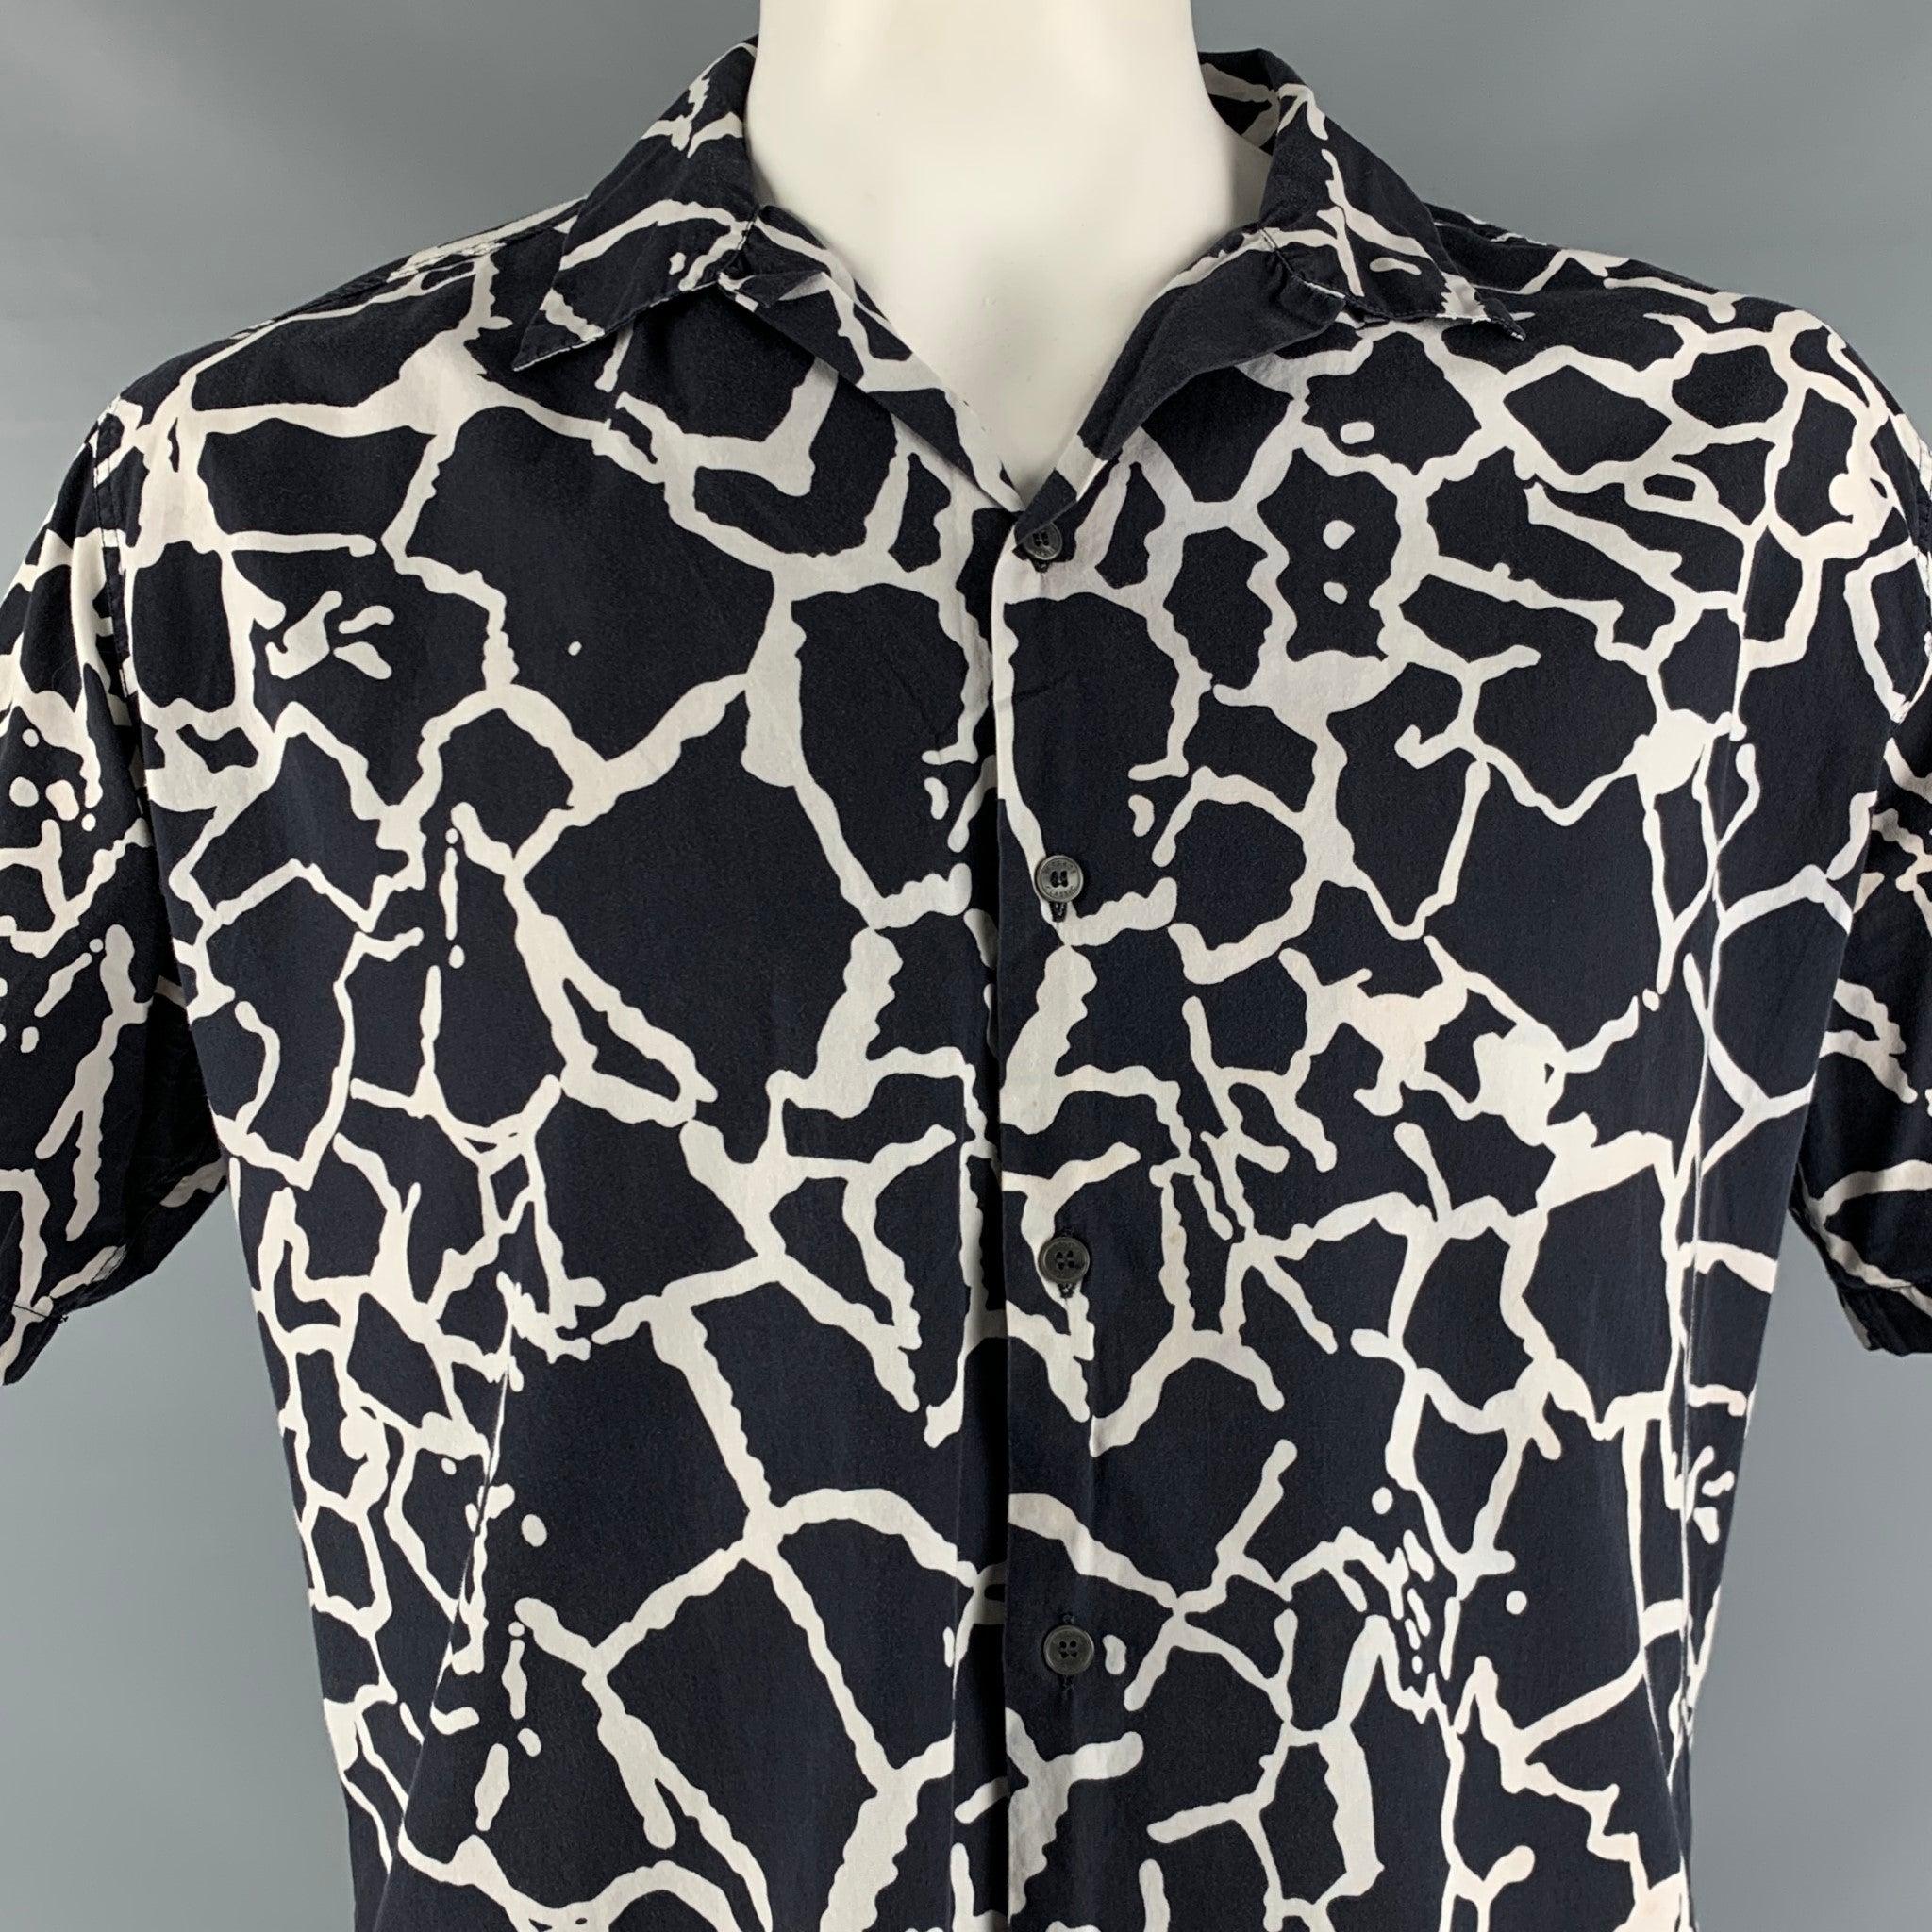 VERSACE short sleeve shirt in a black and white cotton fabric featuring abstract pattern, short sleeves, and a button closure. Made in Italy.Very Good Pre-Owned Condition. Minor marks on front. 

Marked:   XXL 

Measurements: 
 
Shoulder: 19.5